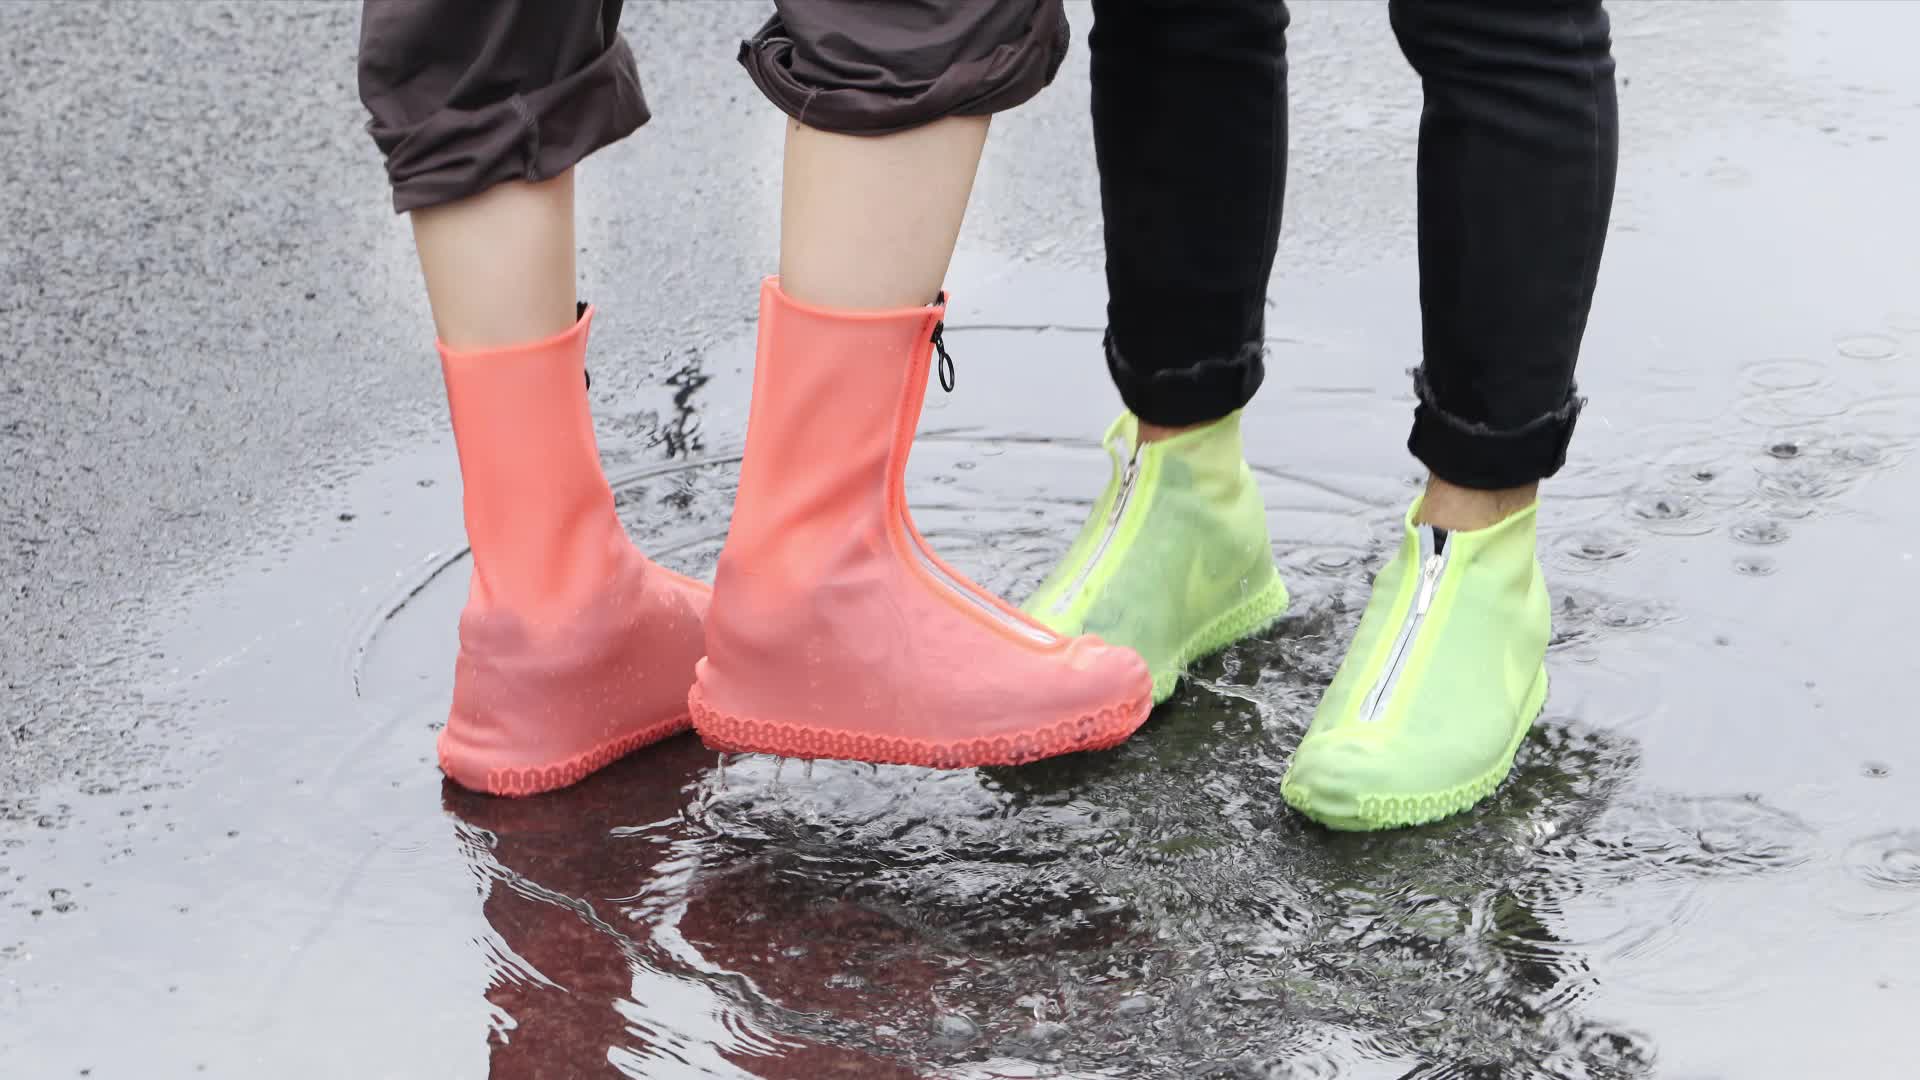 Sundlight Reusable Silicone Rain Shoes Covers Outdoor Waterproof Silicone Shoes Covers and Reusable Rain Boots Overshoes Galoshes Travel for Women Men